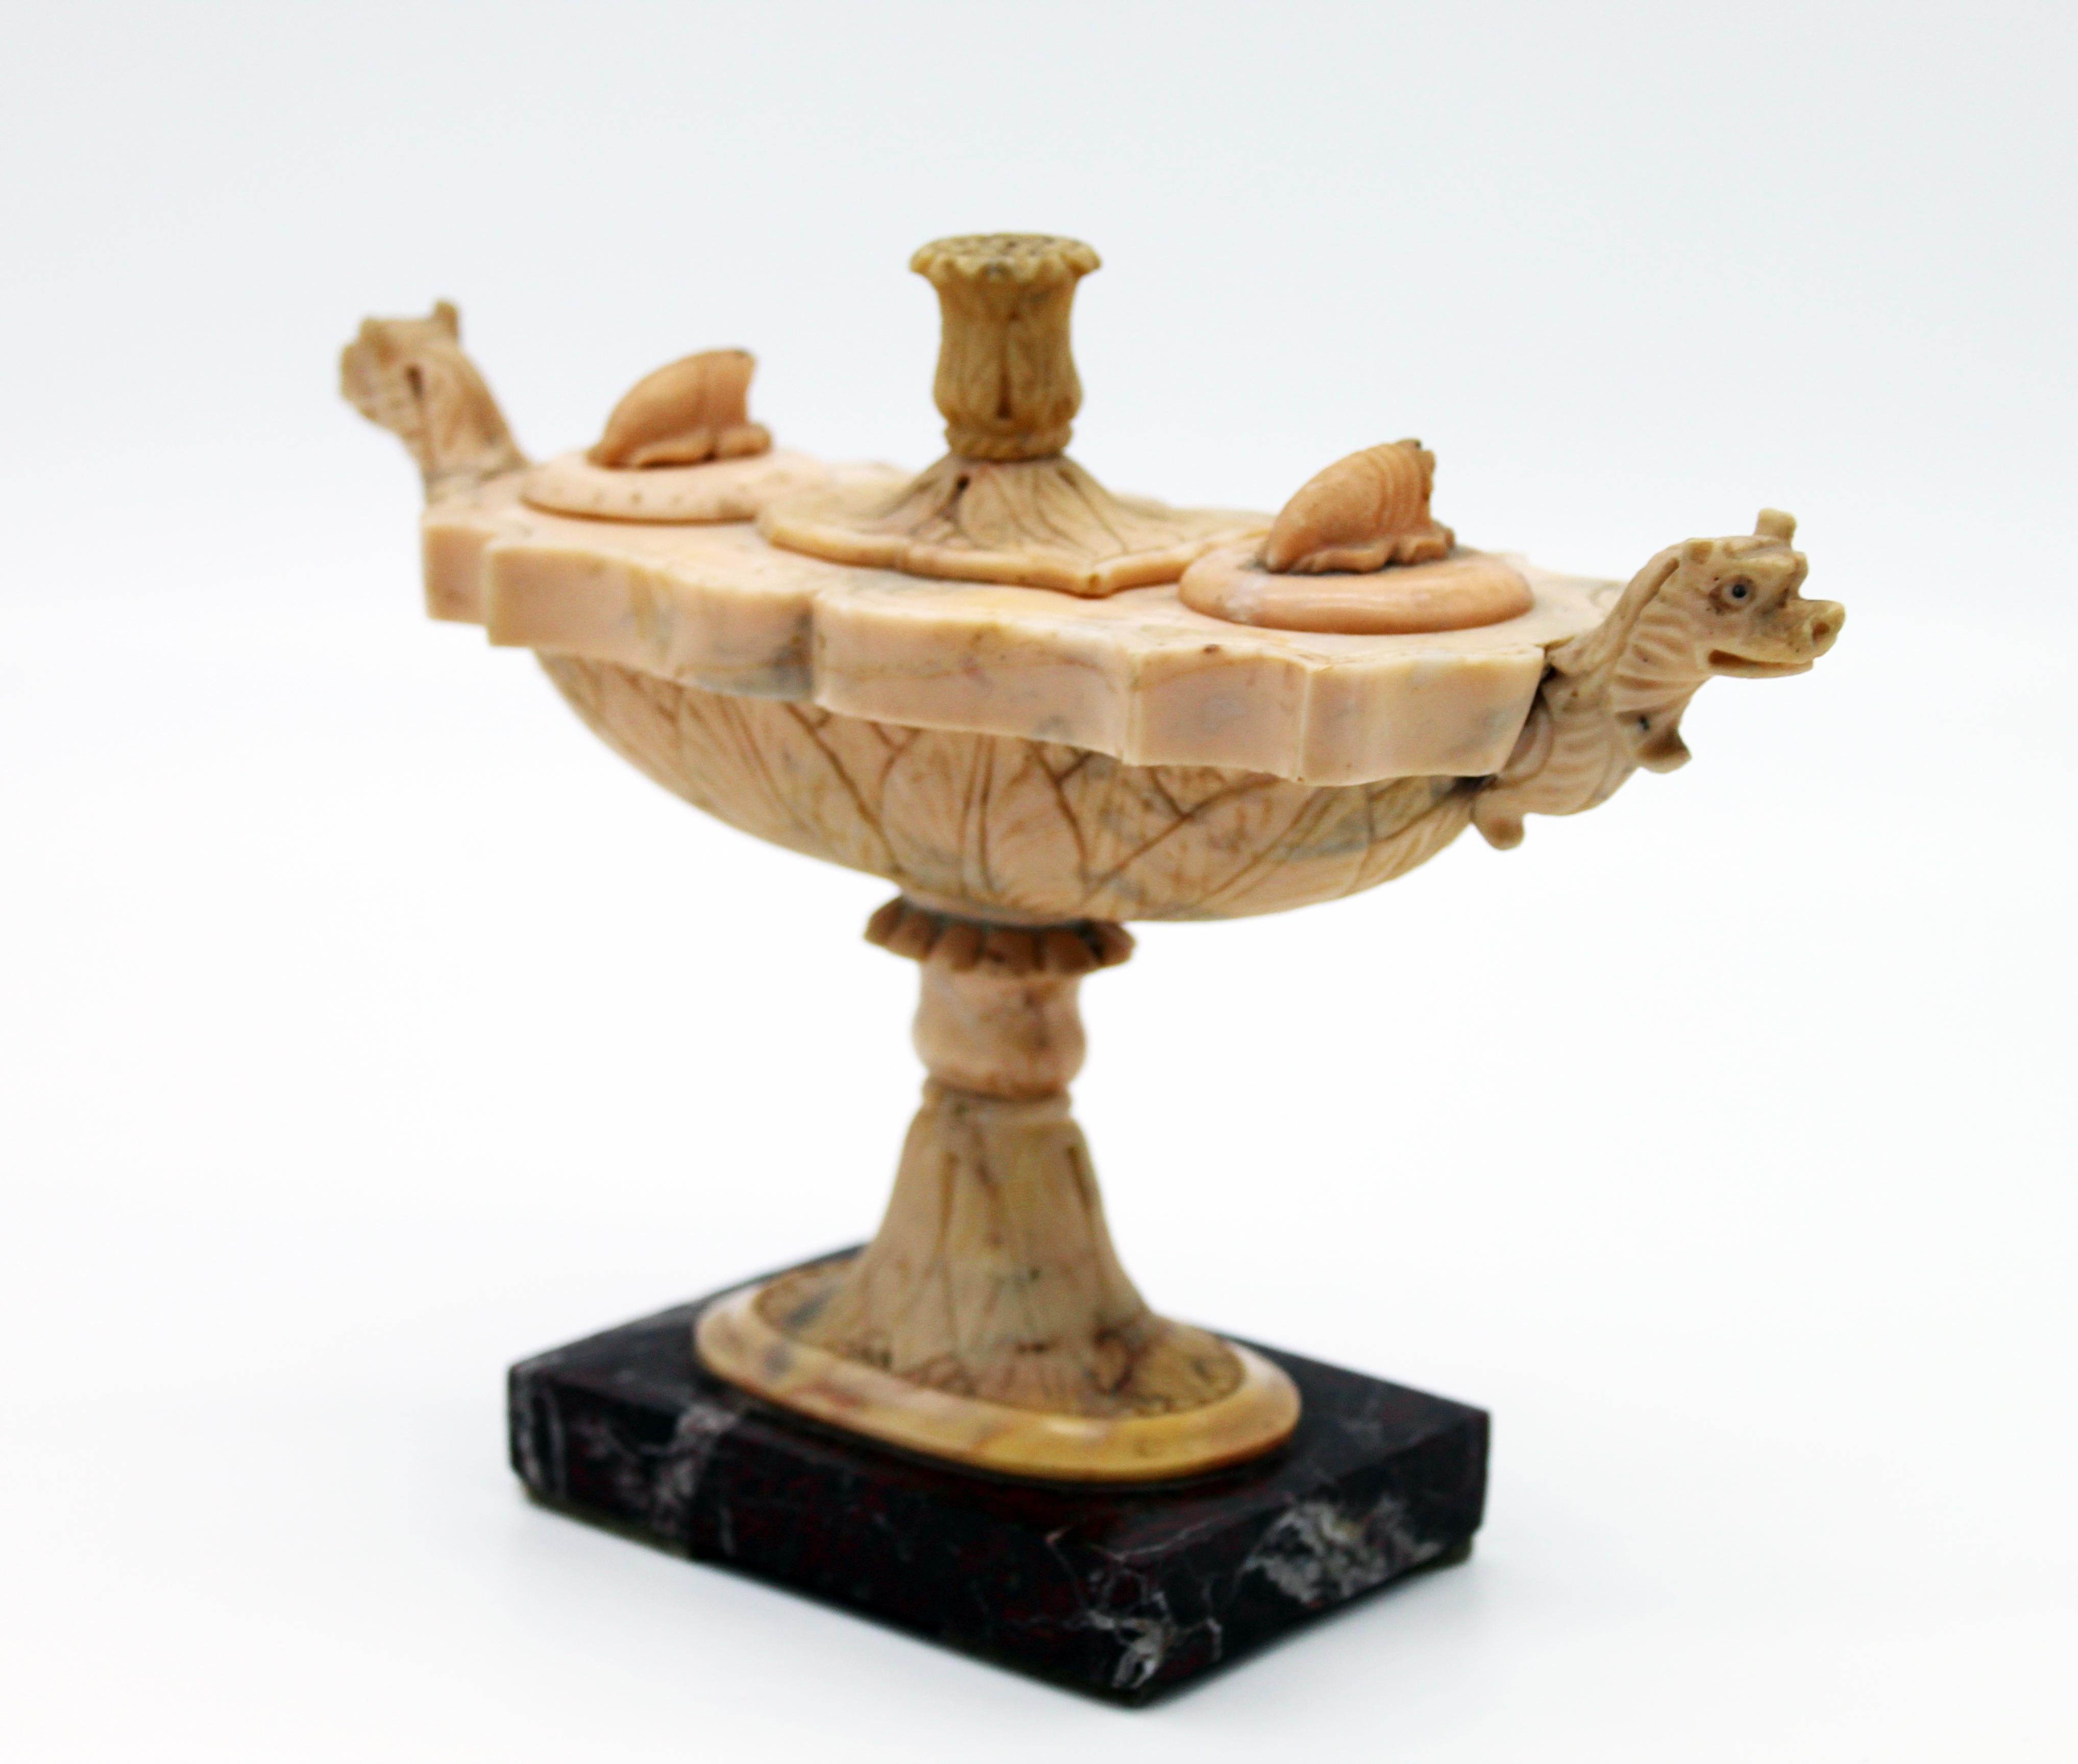 A very nice and iconic piece attributed to Benedetto Boschetti as for the skill in making and the quality of the carving but also for the subject and the material used.
A grand tour pieces of a marble oil lamp, inspired by the ancient romans